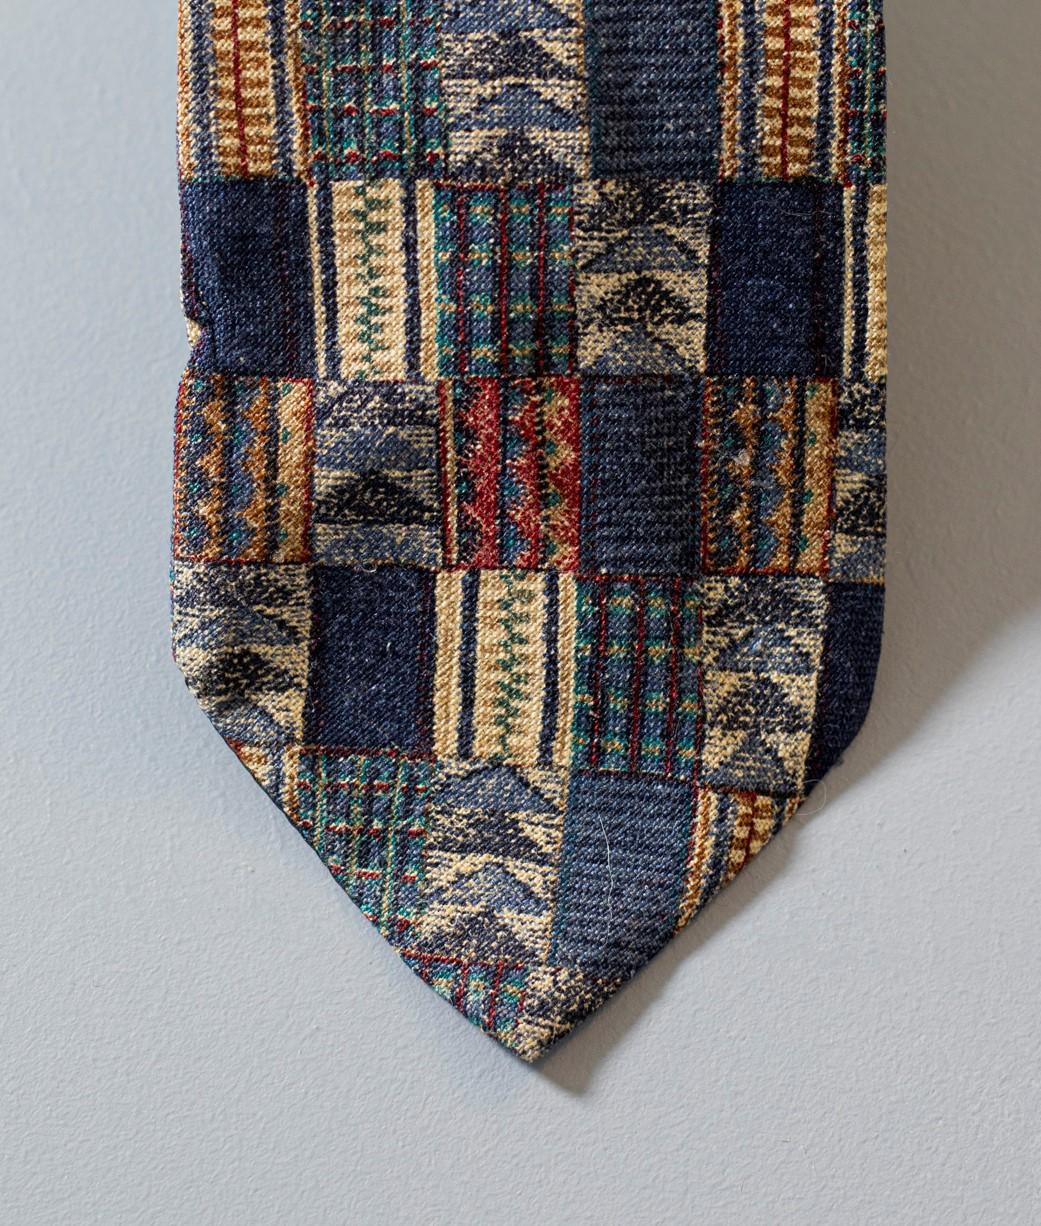 Vintage Di Alessandro tie, It is made of 100% silk, which is the reason why it is smooth and of good quality. Decorated with small squares each with different motifs. If you don't know what to wear for a winter evening with friends, this is the